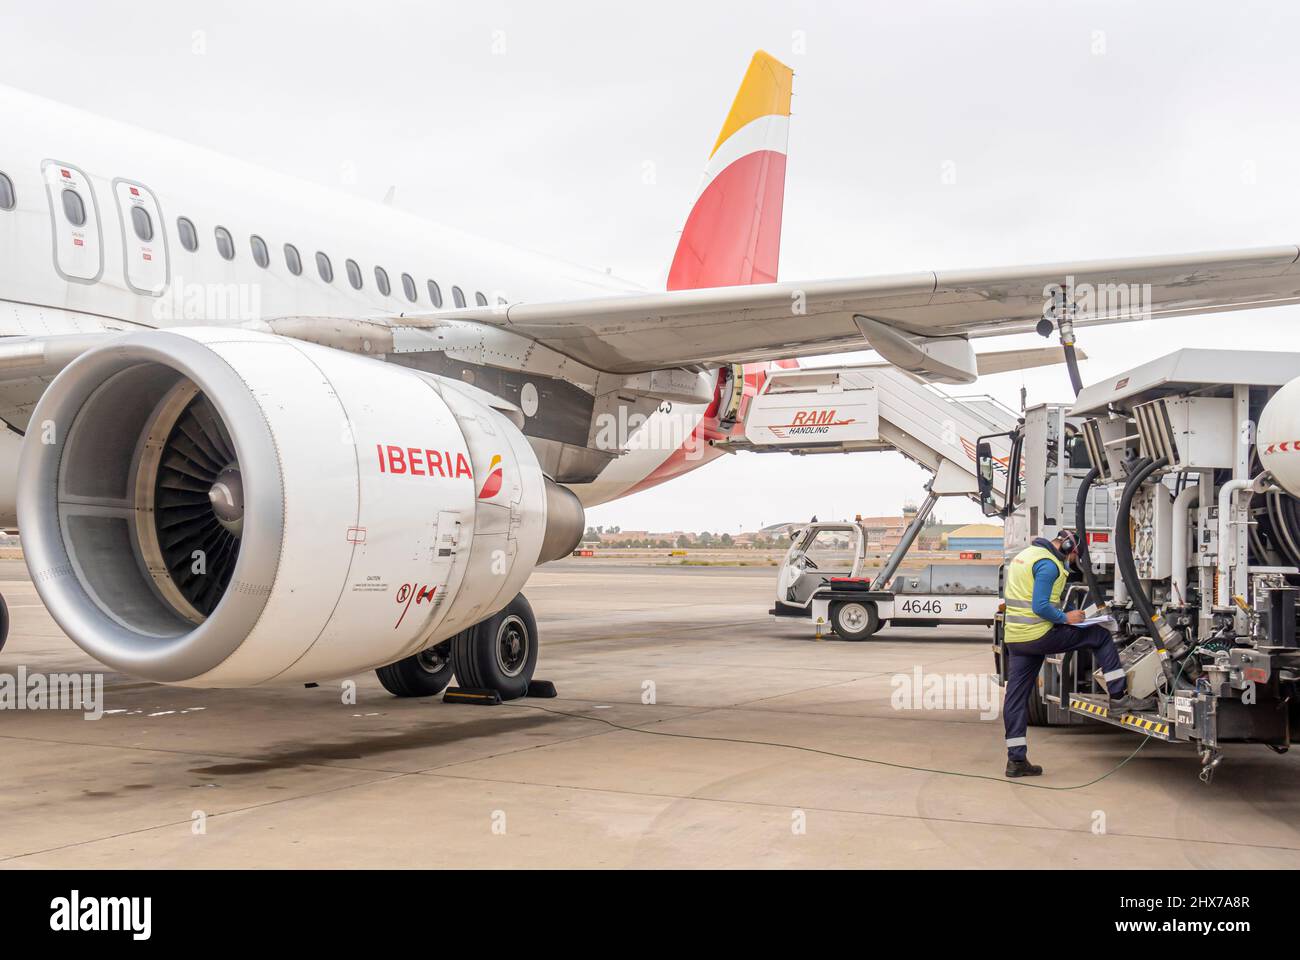 A worker employee refueling Iberia airlines Airbus A320 twin-engine jet aircraft airplane in Marrakesh Menara Airport, Morocco, North Africa Stock Photo